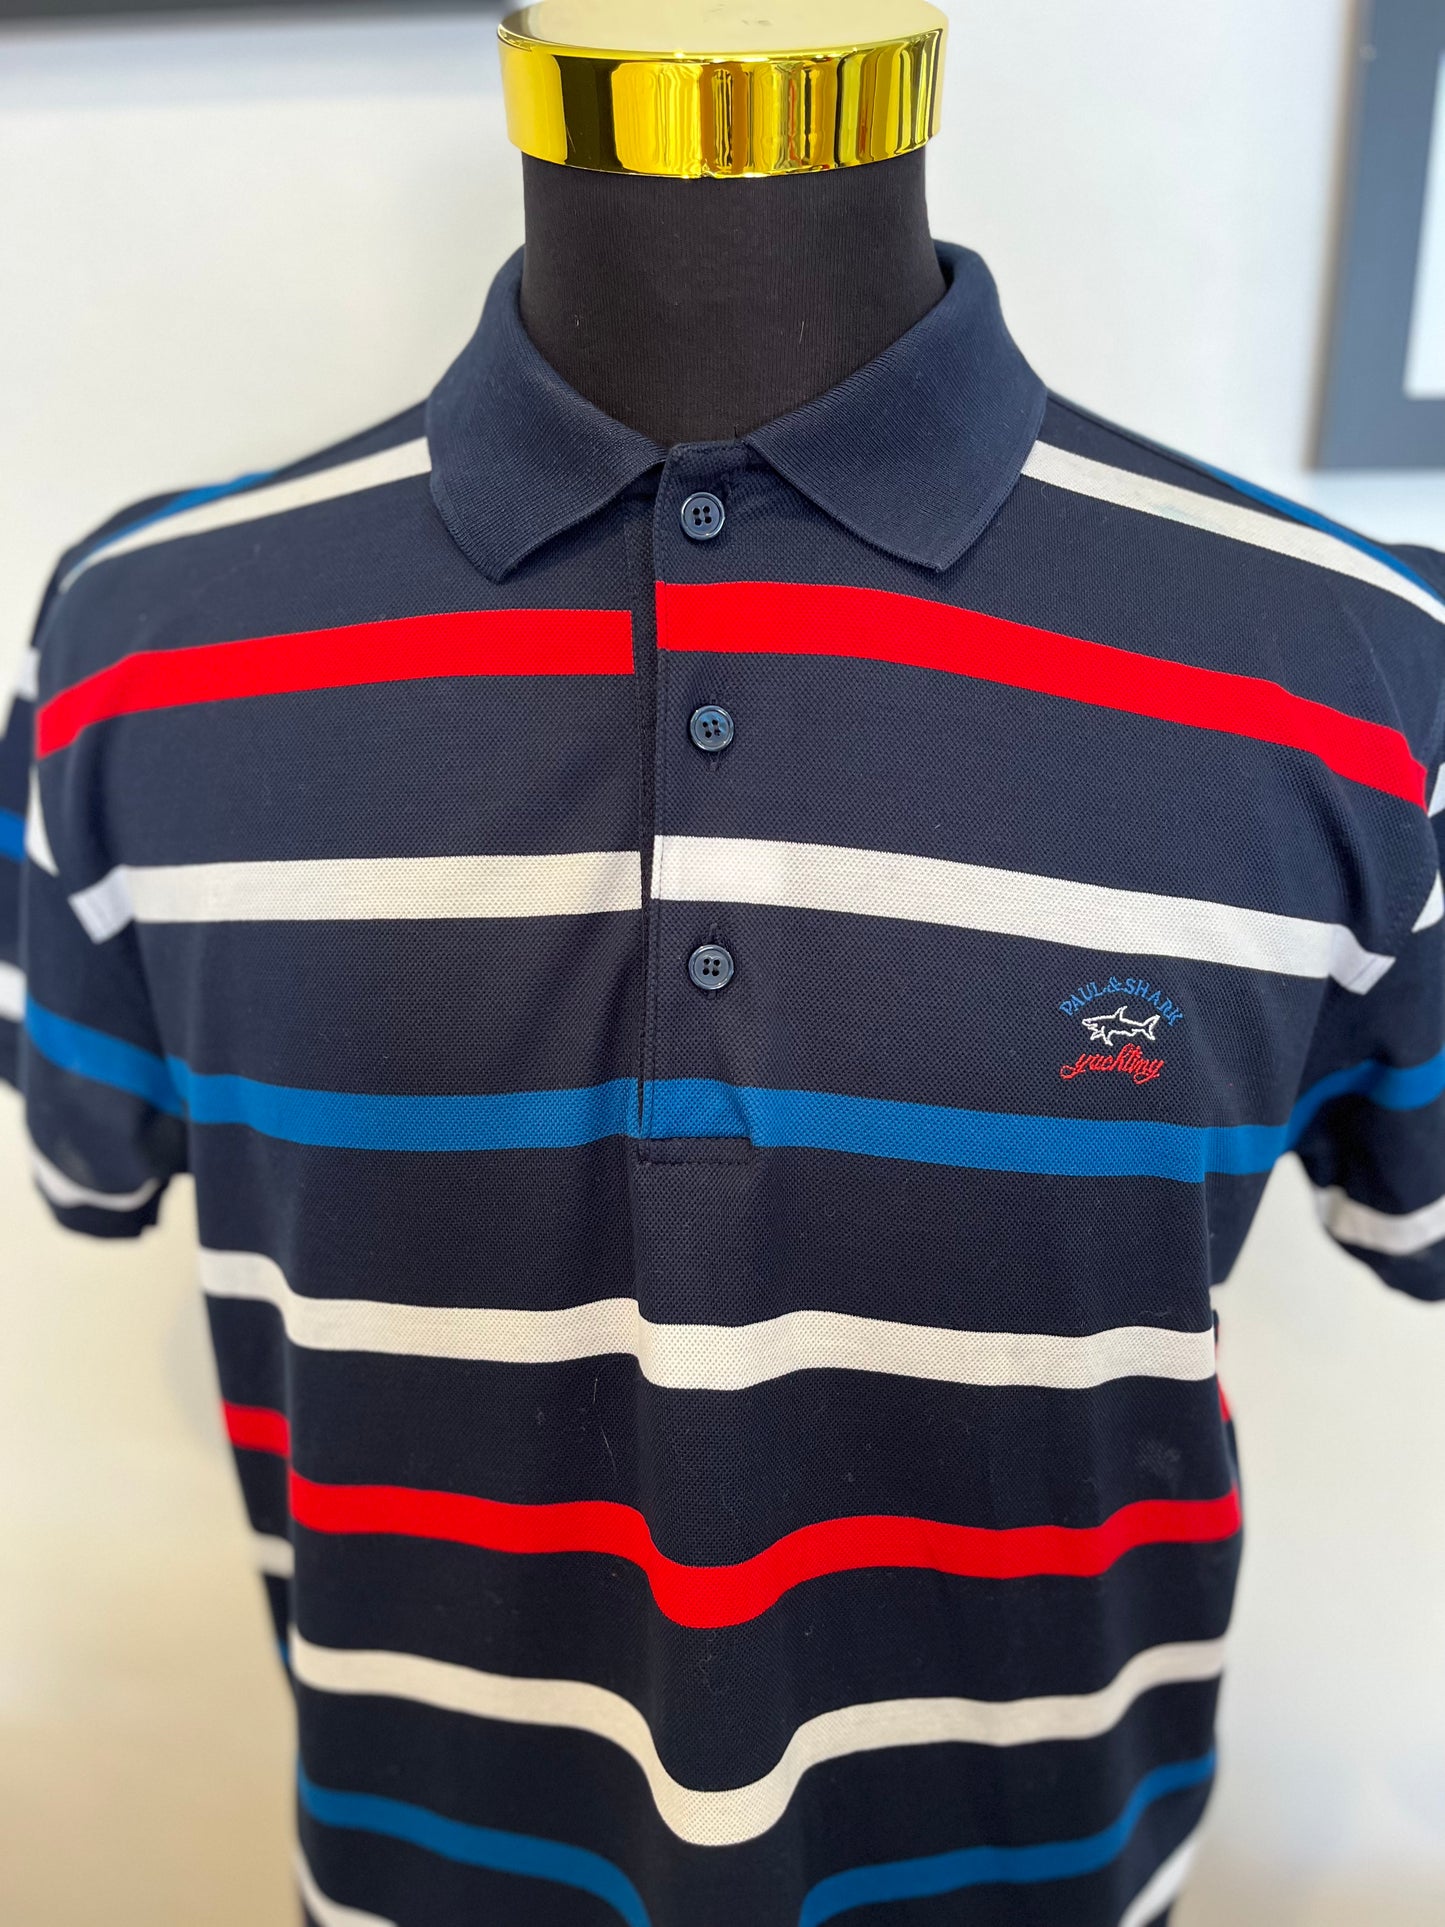 Paul & Shark 100% Cotton Blue Striped Polo Shirt Size XXL Made in Italy Fits more like a Large / XL